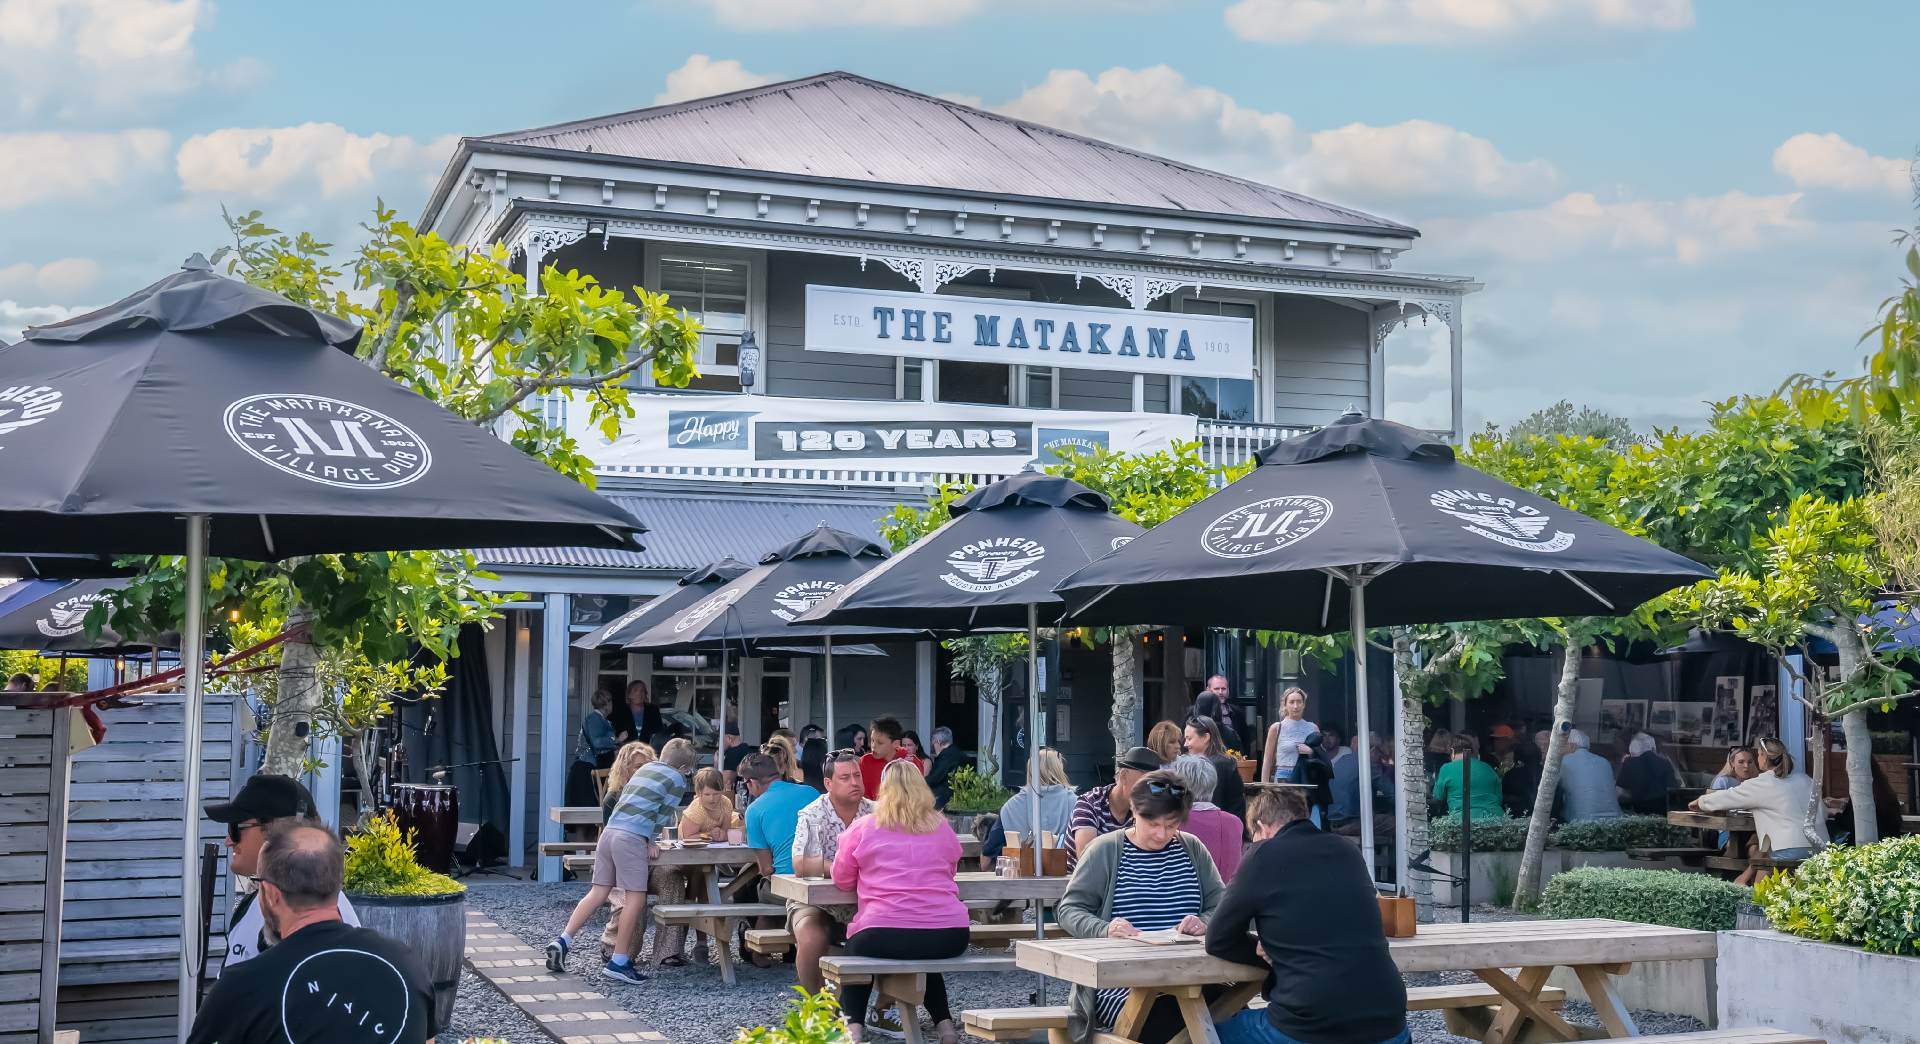 The Votes Are In: These Are the Top 50 Gastropubs in New Zealand According to Pint-Loving Kiwis